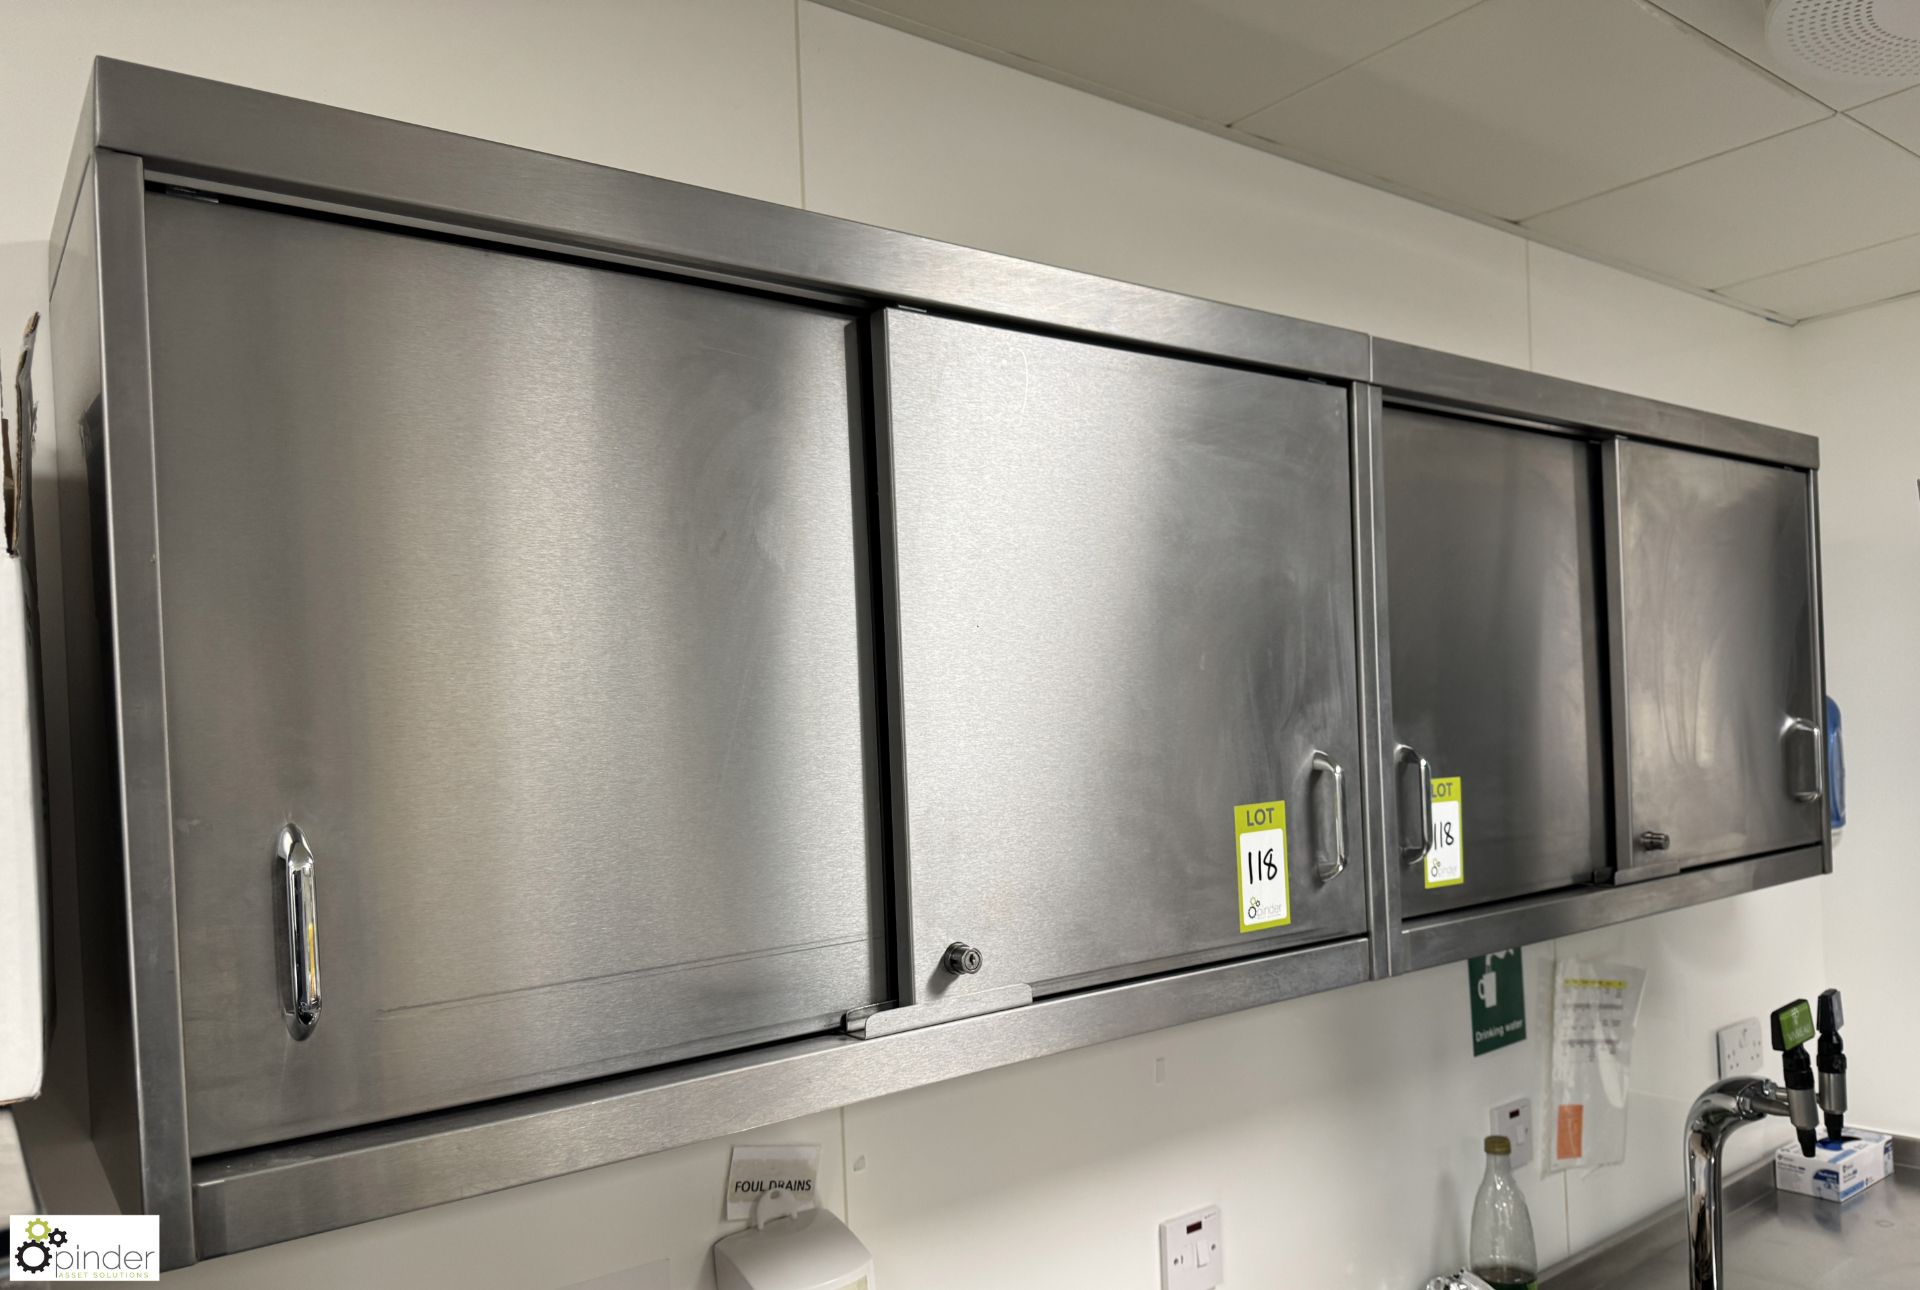 2 stainless steel wall mounted Cabinets, 1000mm x 300mm x 600mm (location in building - level 7) - Bild 2 aus 5